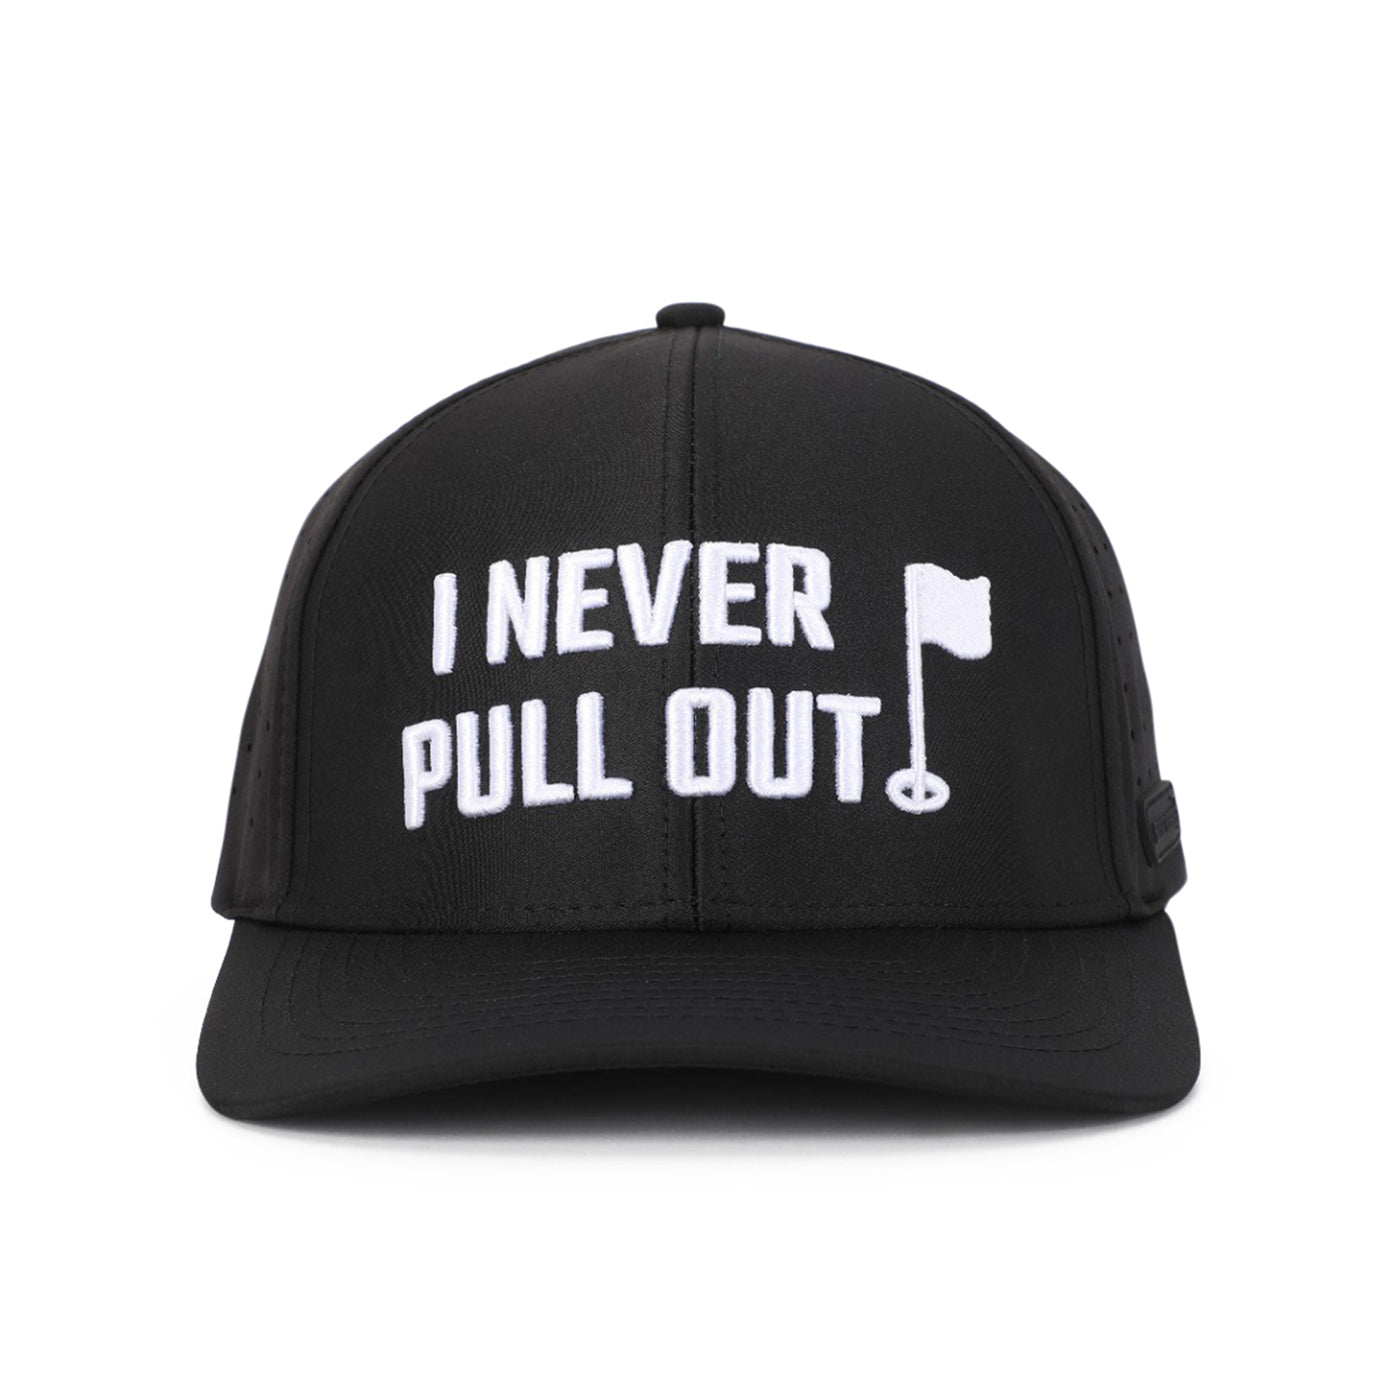 I Never Pull Out - Performance Golf Hat - Stretch Fit